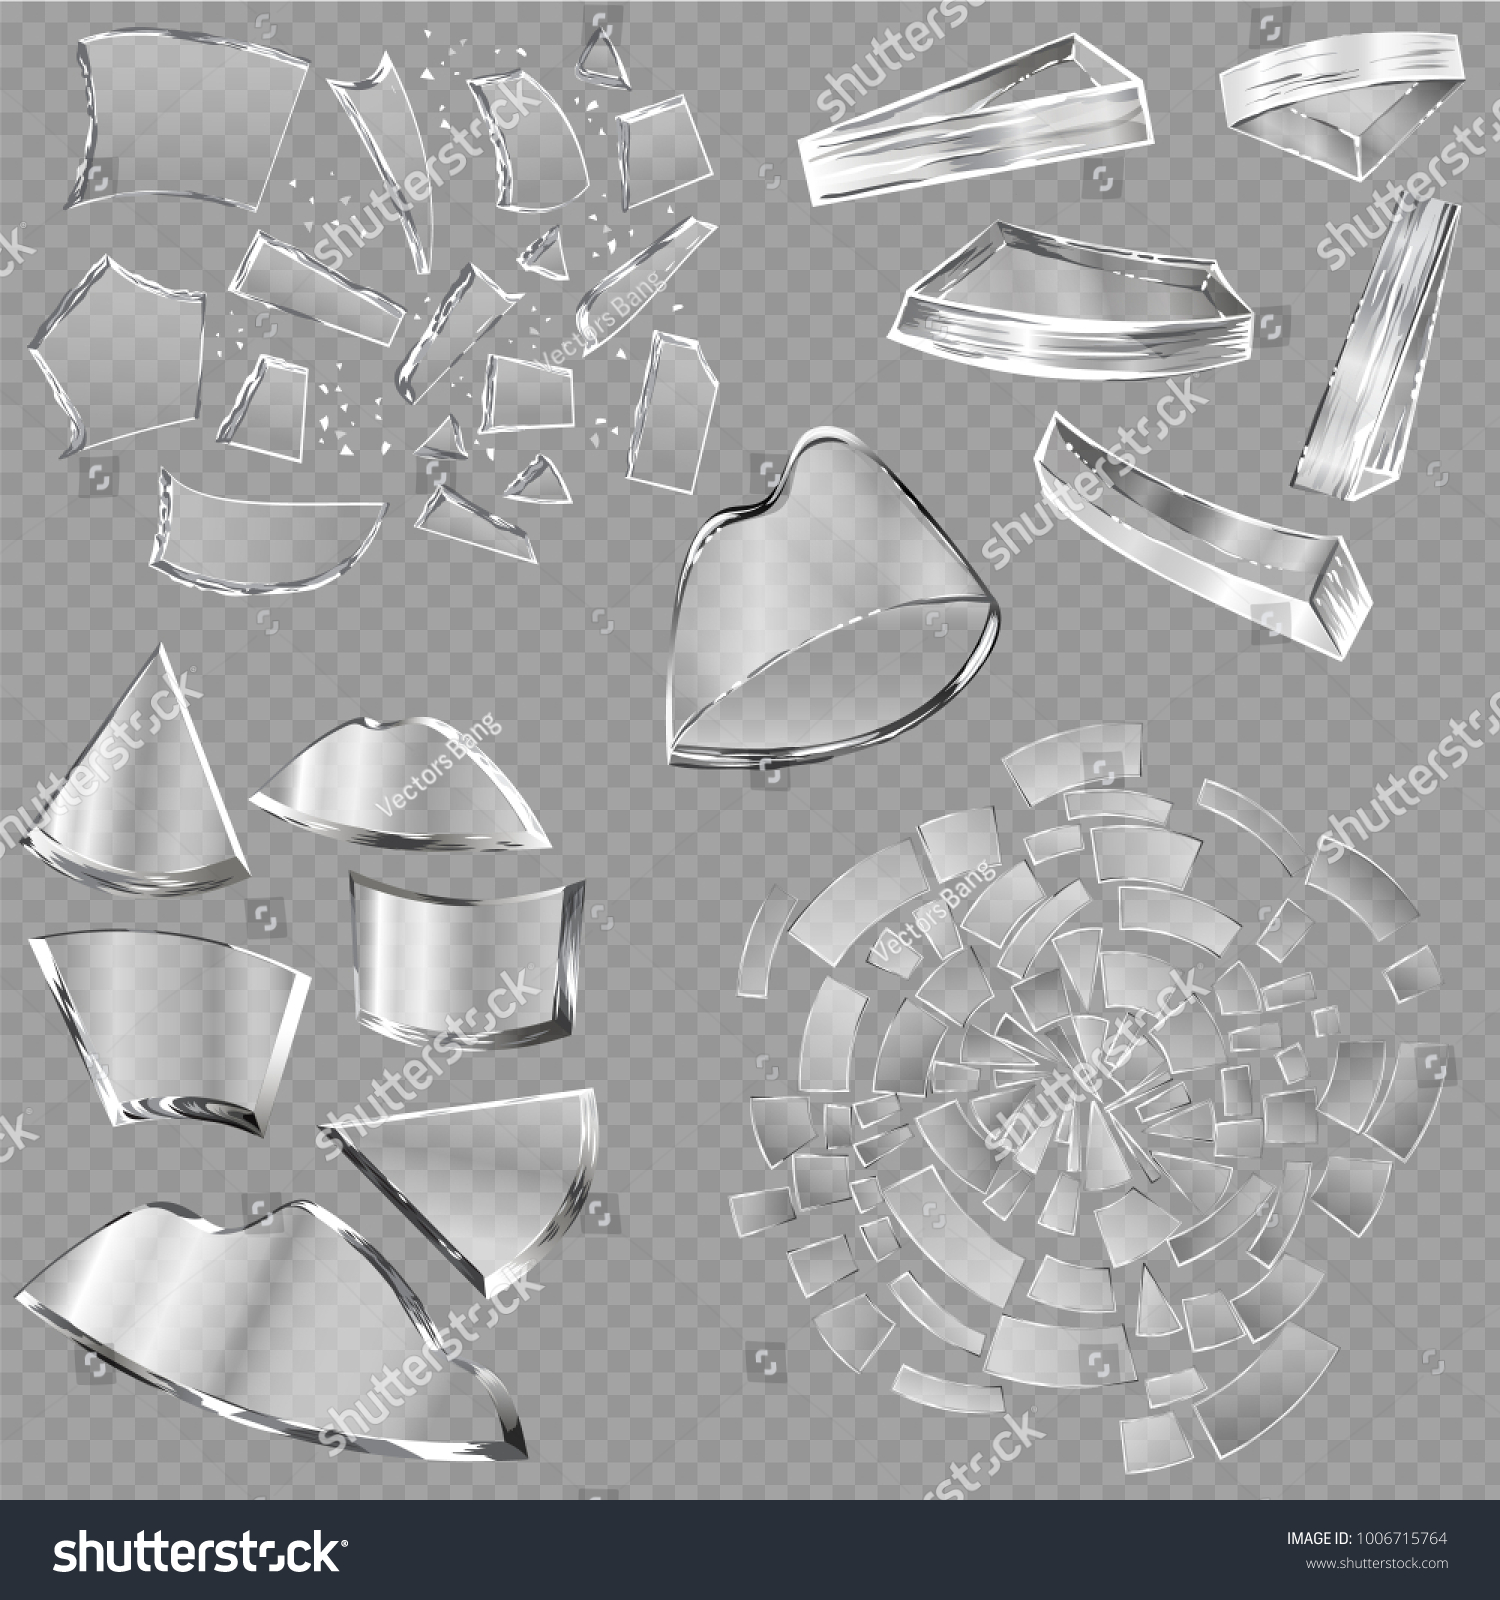 SVG of Broken glass vector sharp pieces of window and realistic shattered glassware or shattering debris of breaking mirror isolated on transparent background illustration backdrop svg